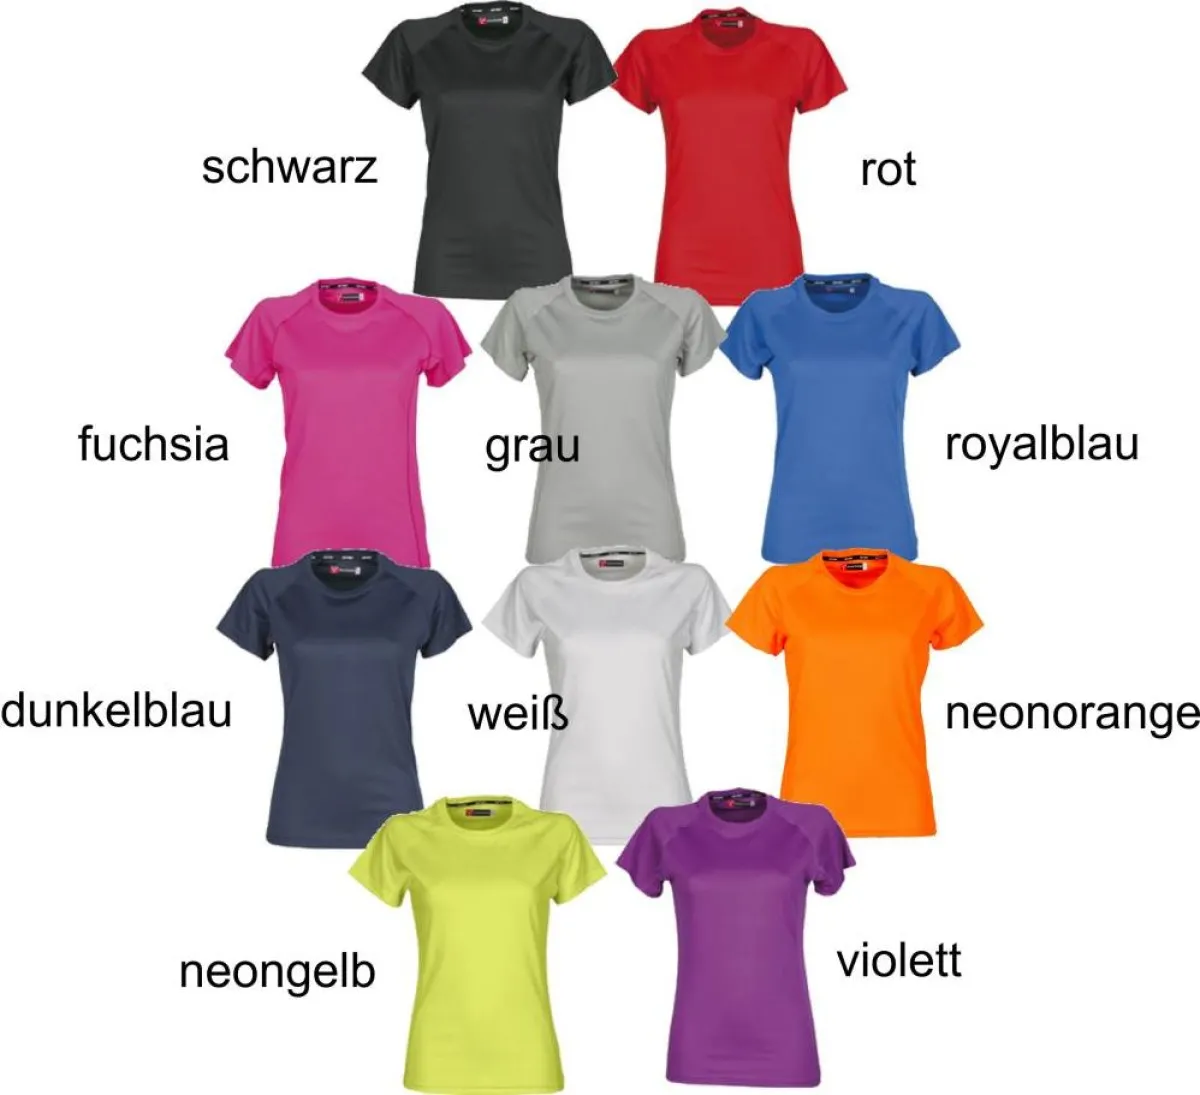 Ladies functional shirt with shirt number and name